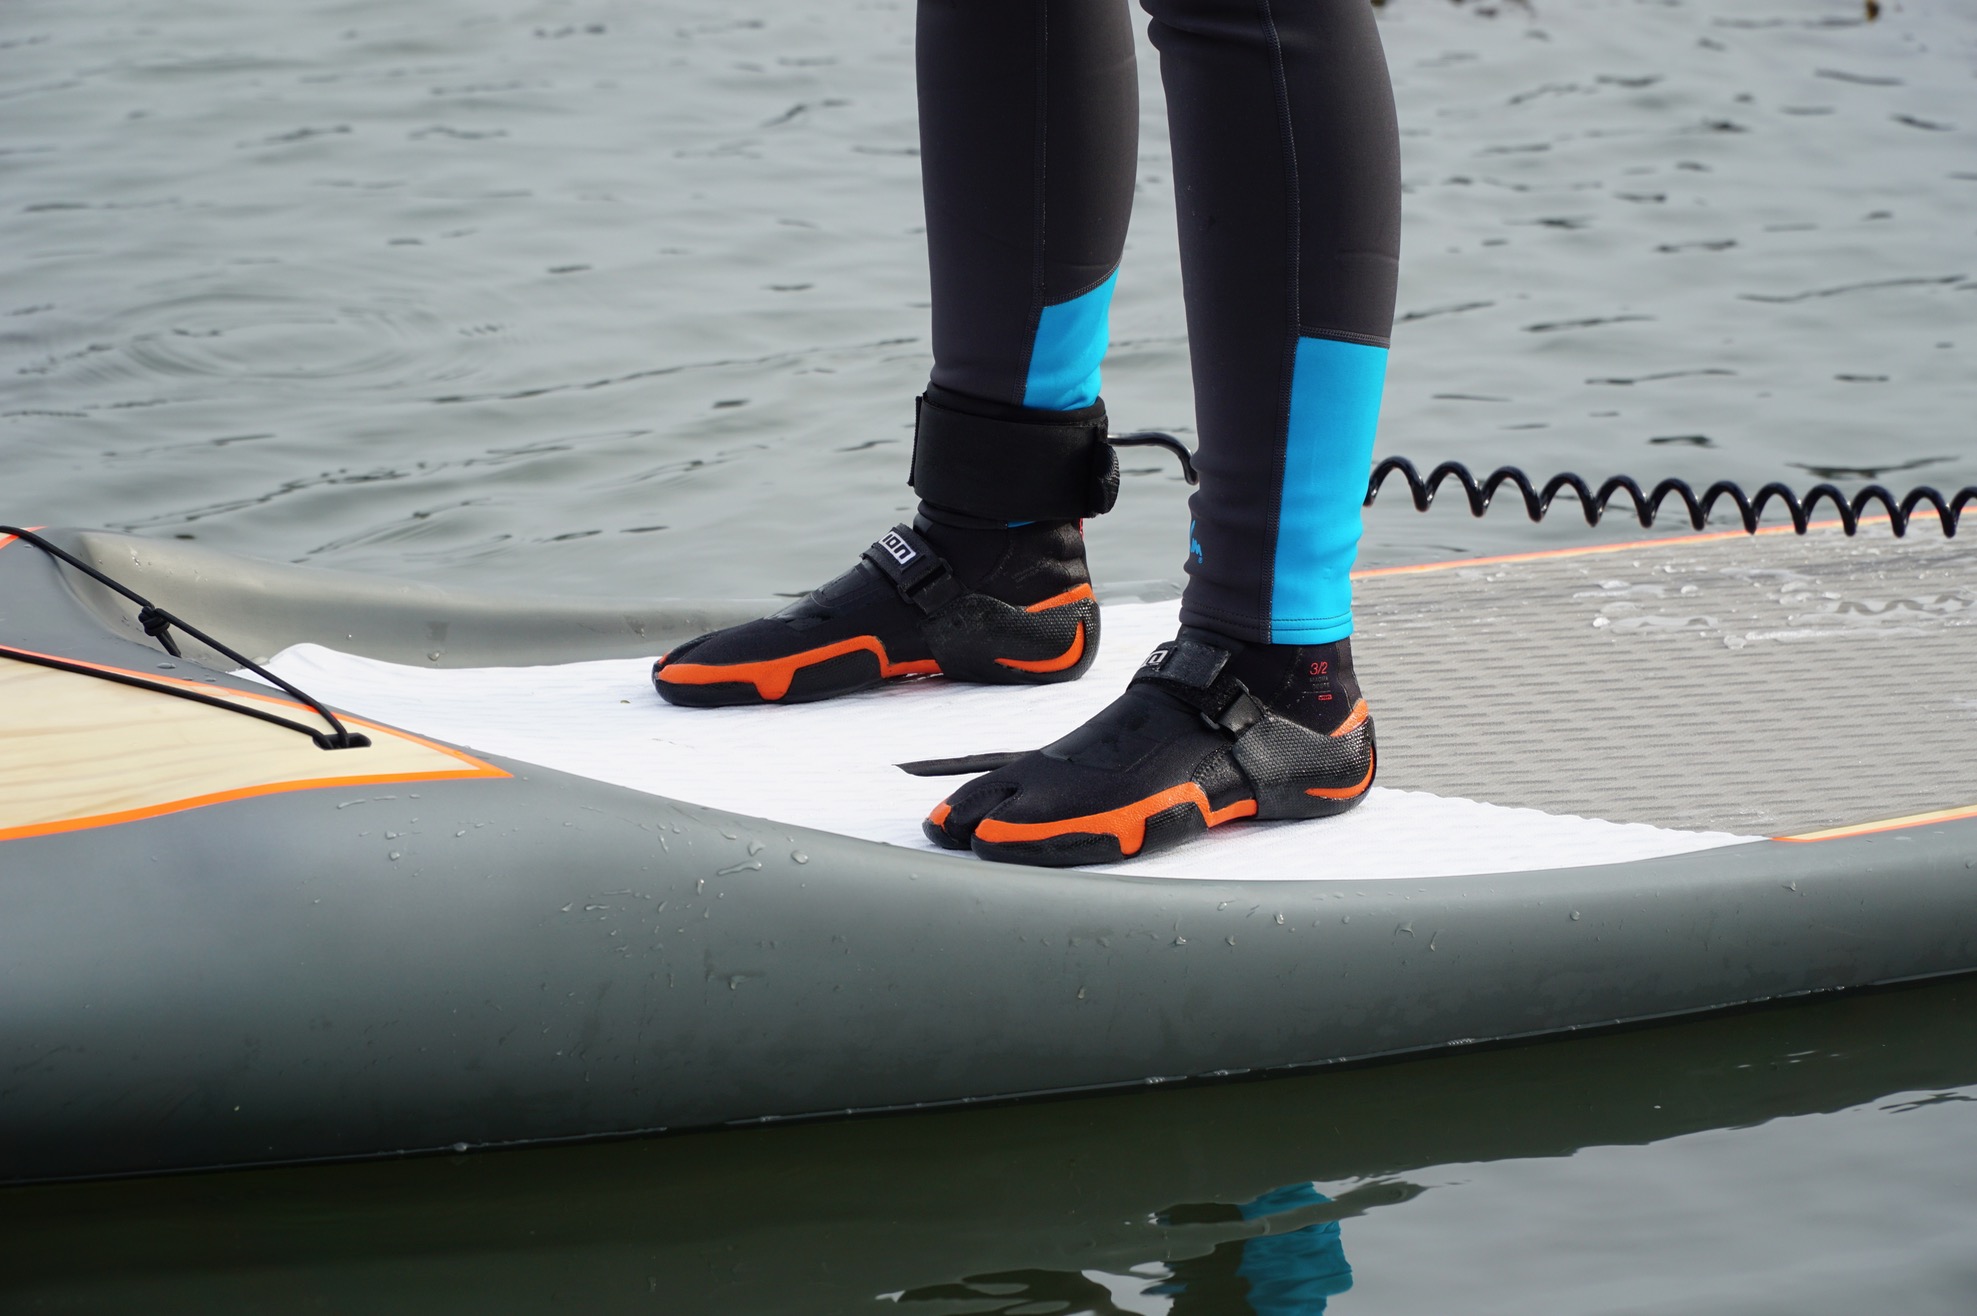 What to wear on your feet paddleboarding? - neoprene boots